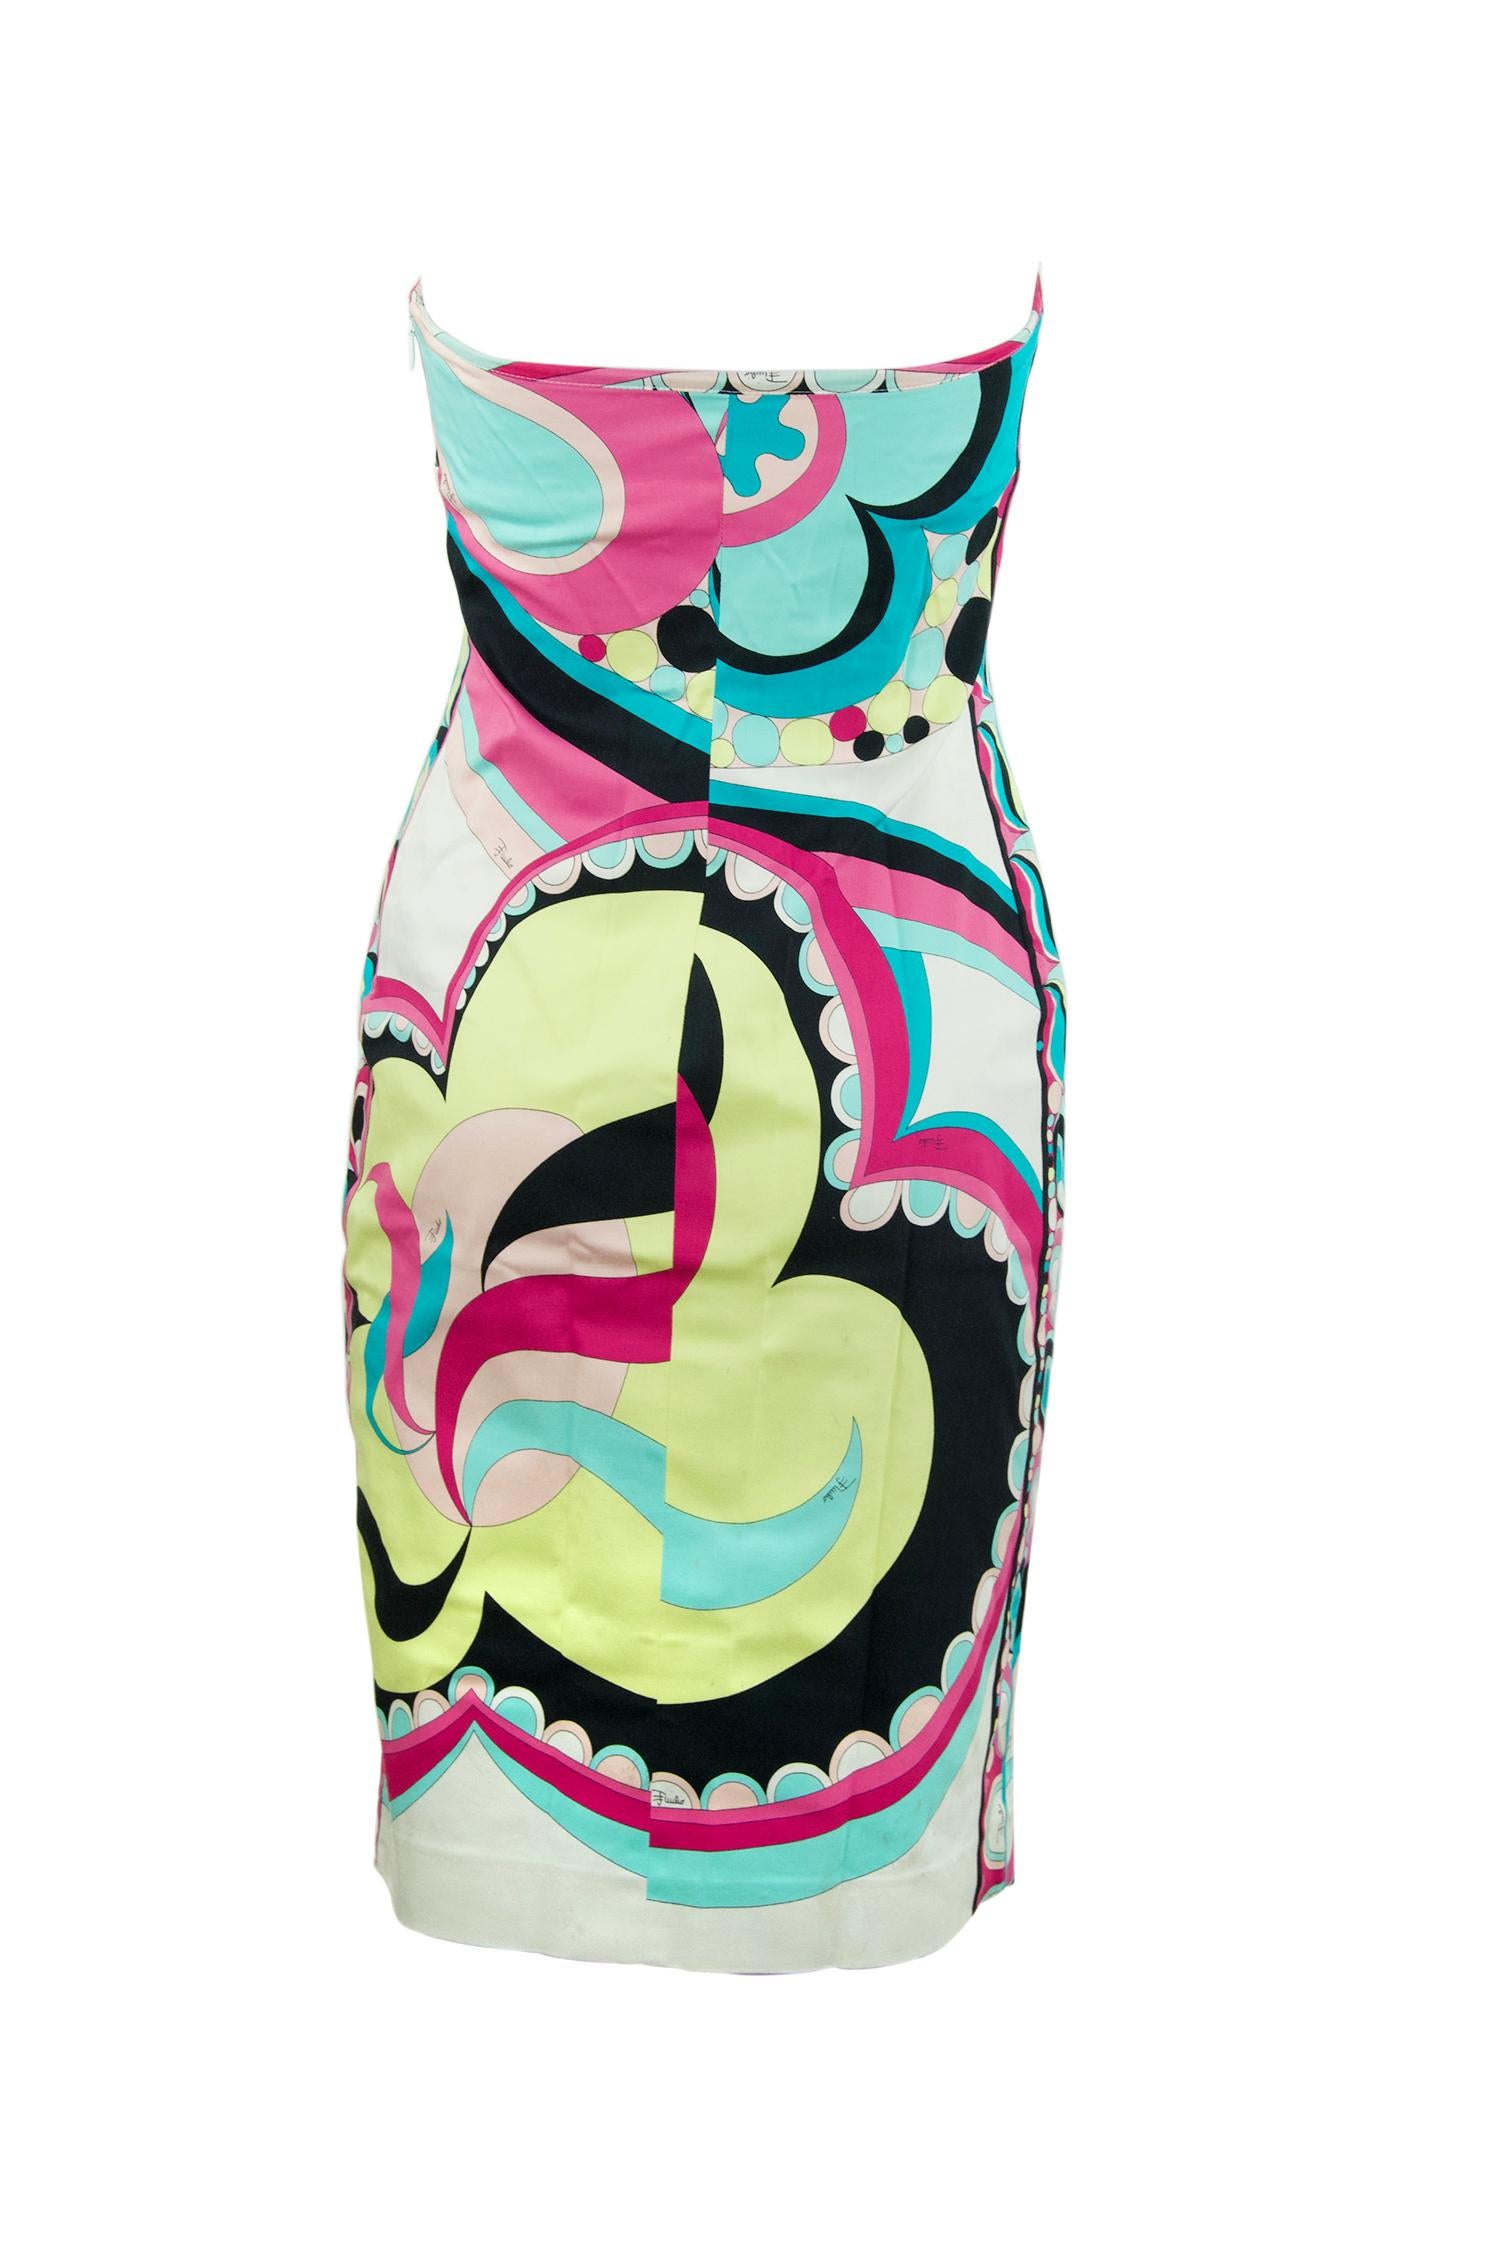 Gray Pucci Multicolored Printed Strapless Dress - Size 6 For Sale